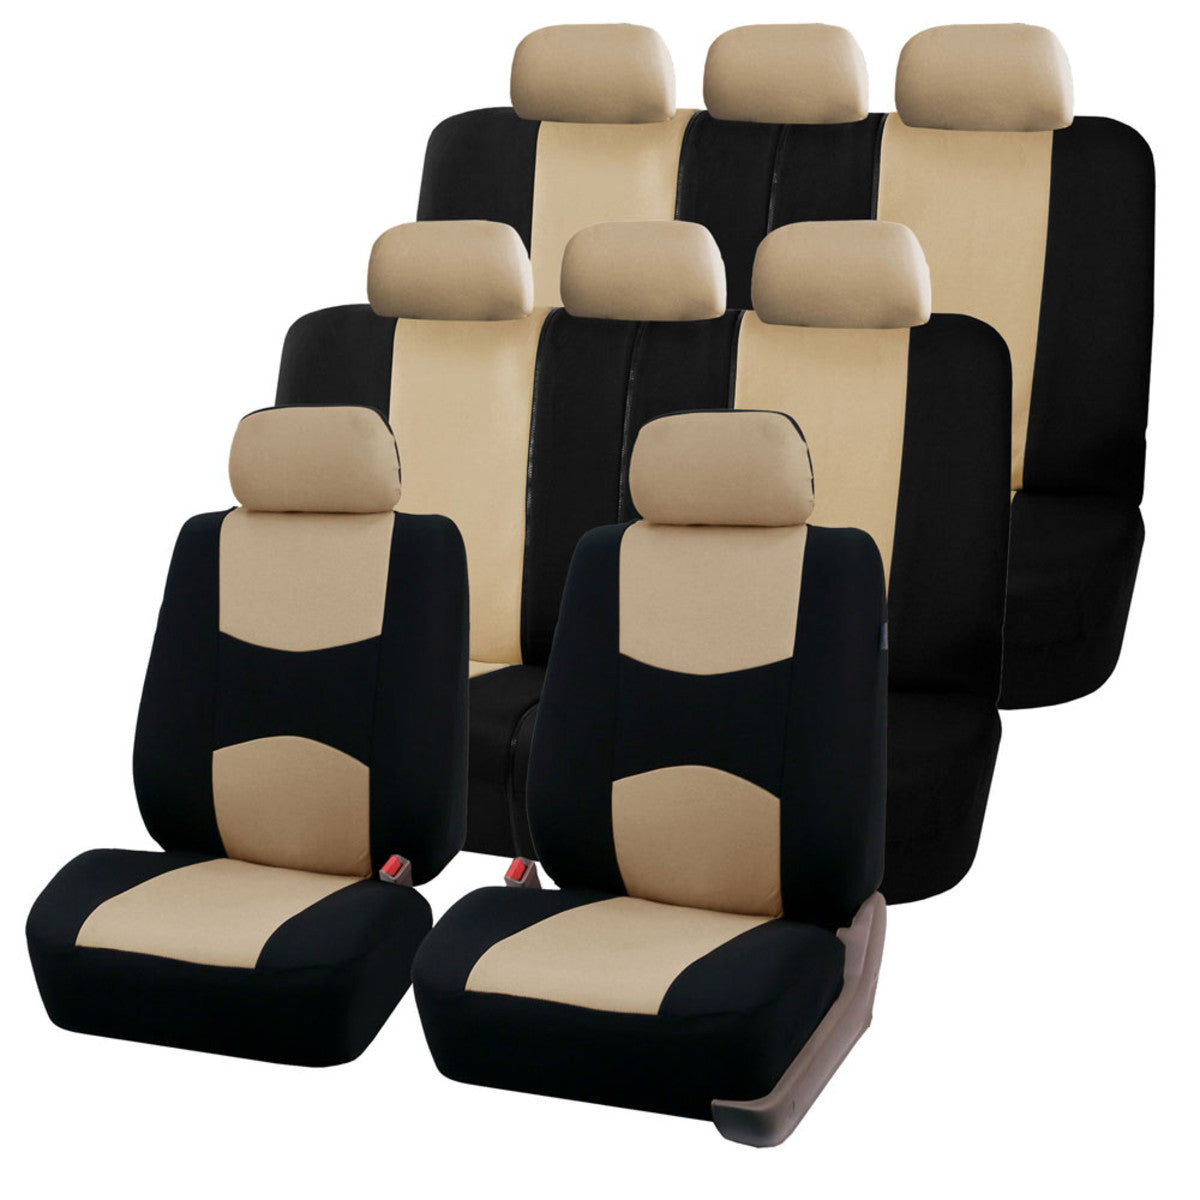 Multifunctional Flat Cloth Car 3 Row Seat Covers Beige